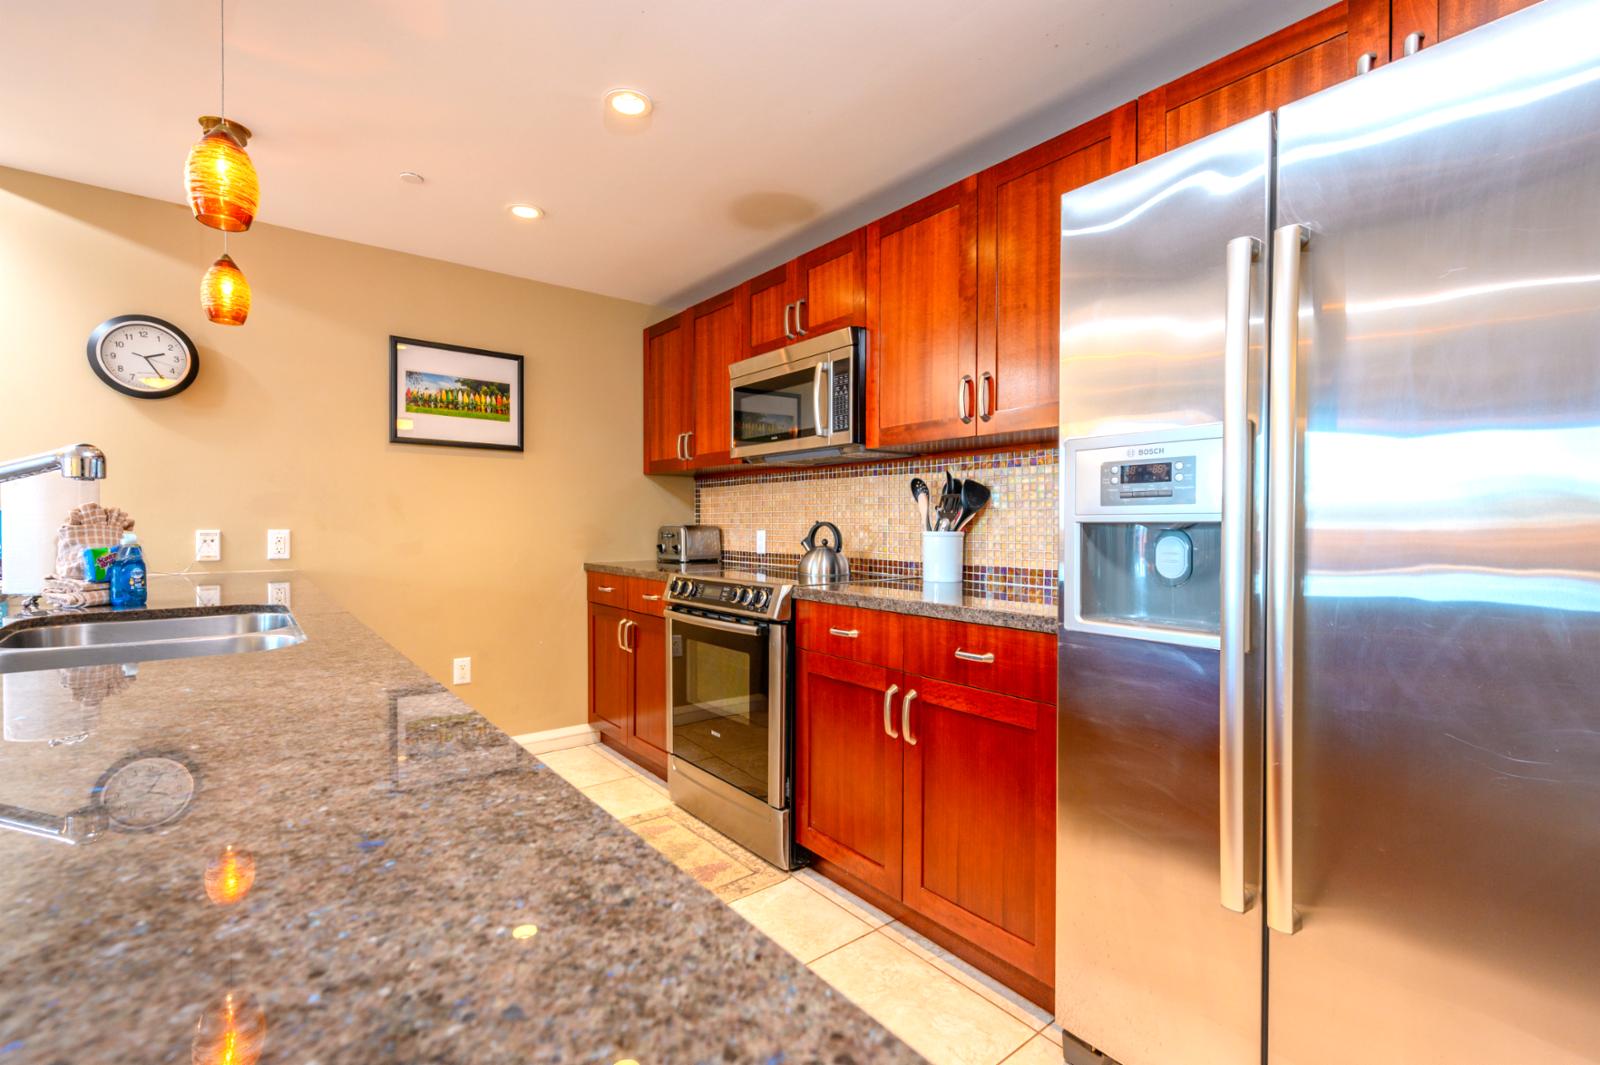 Stainless appliances throughout and generously stocked kitchen